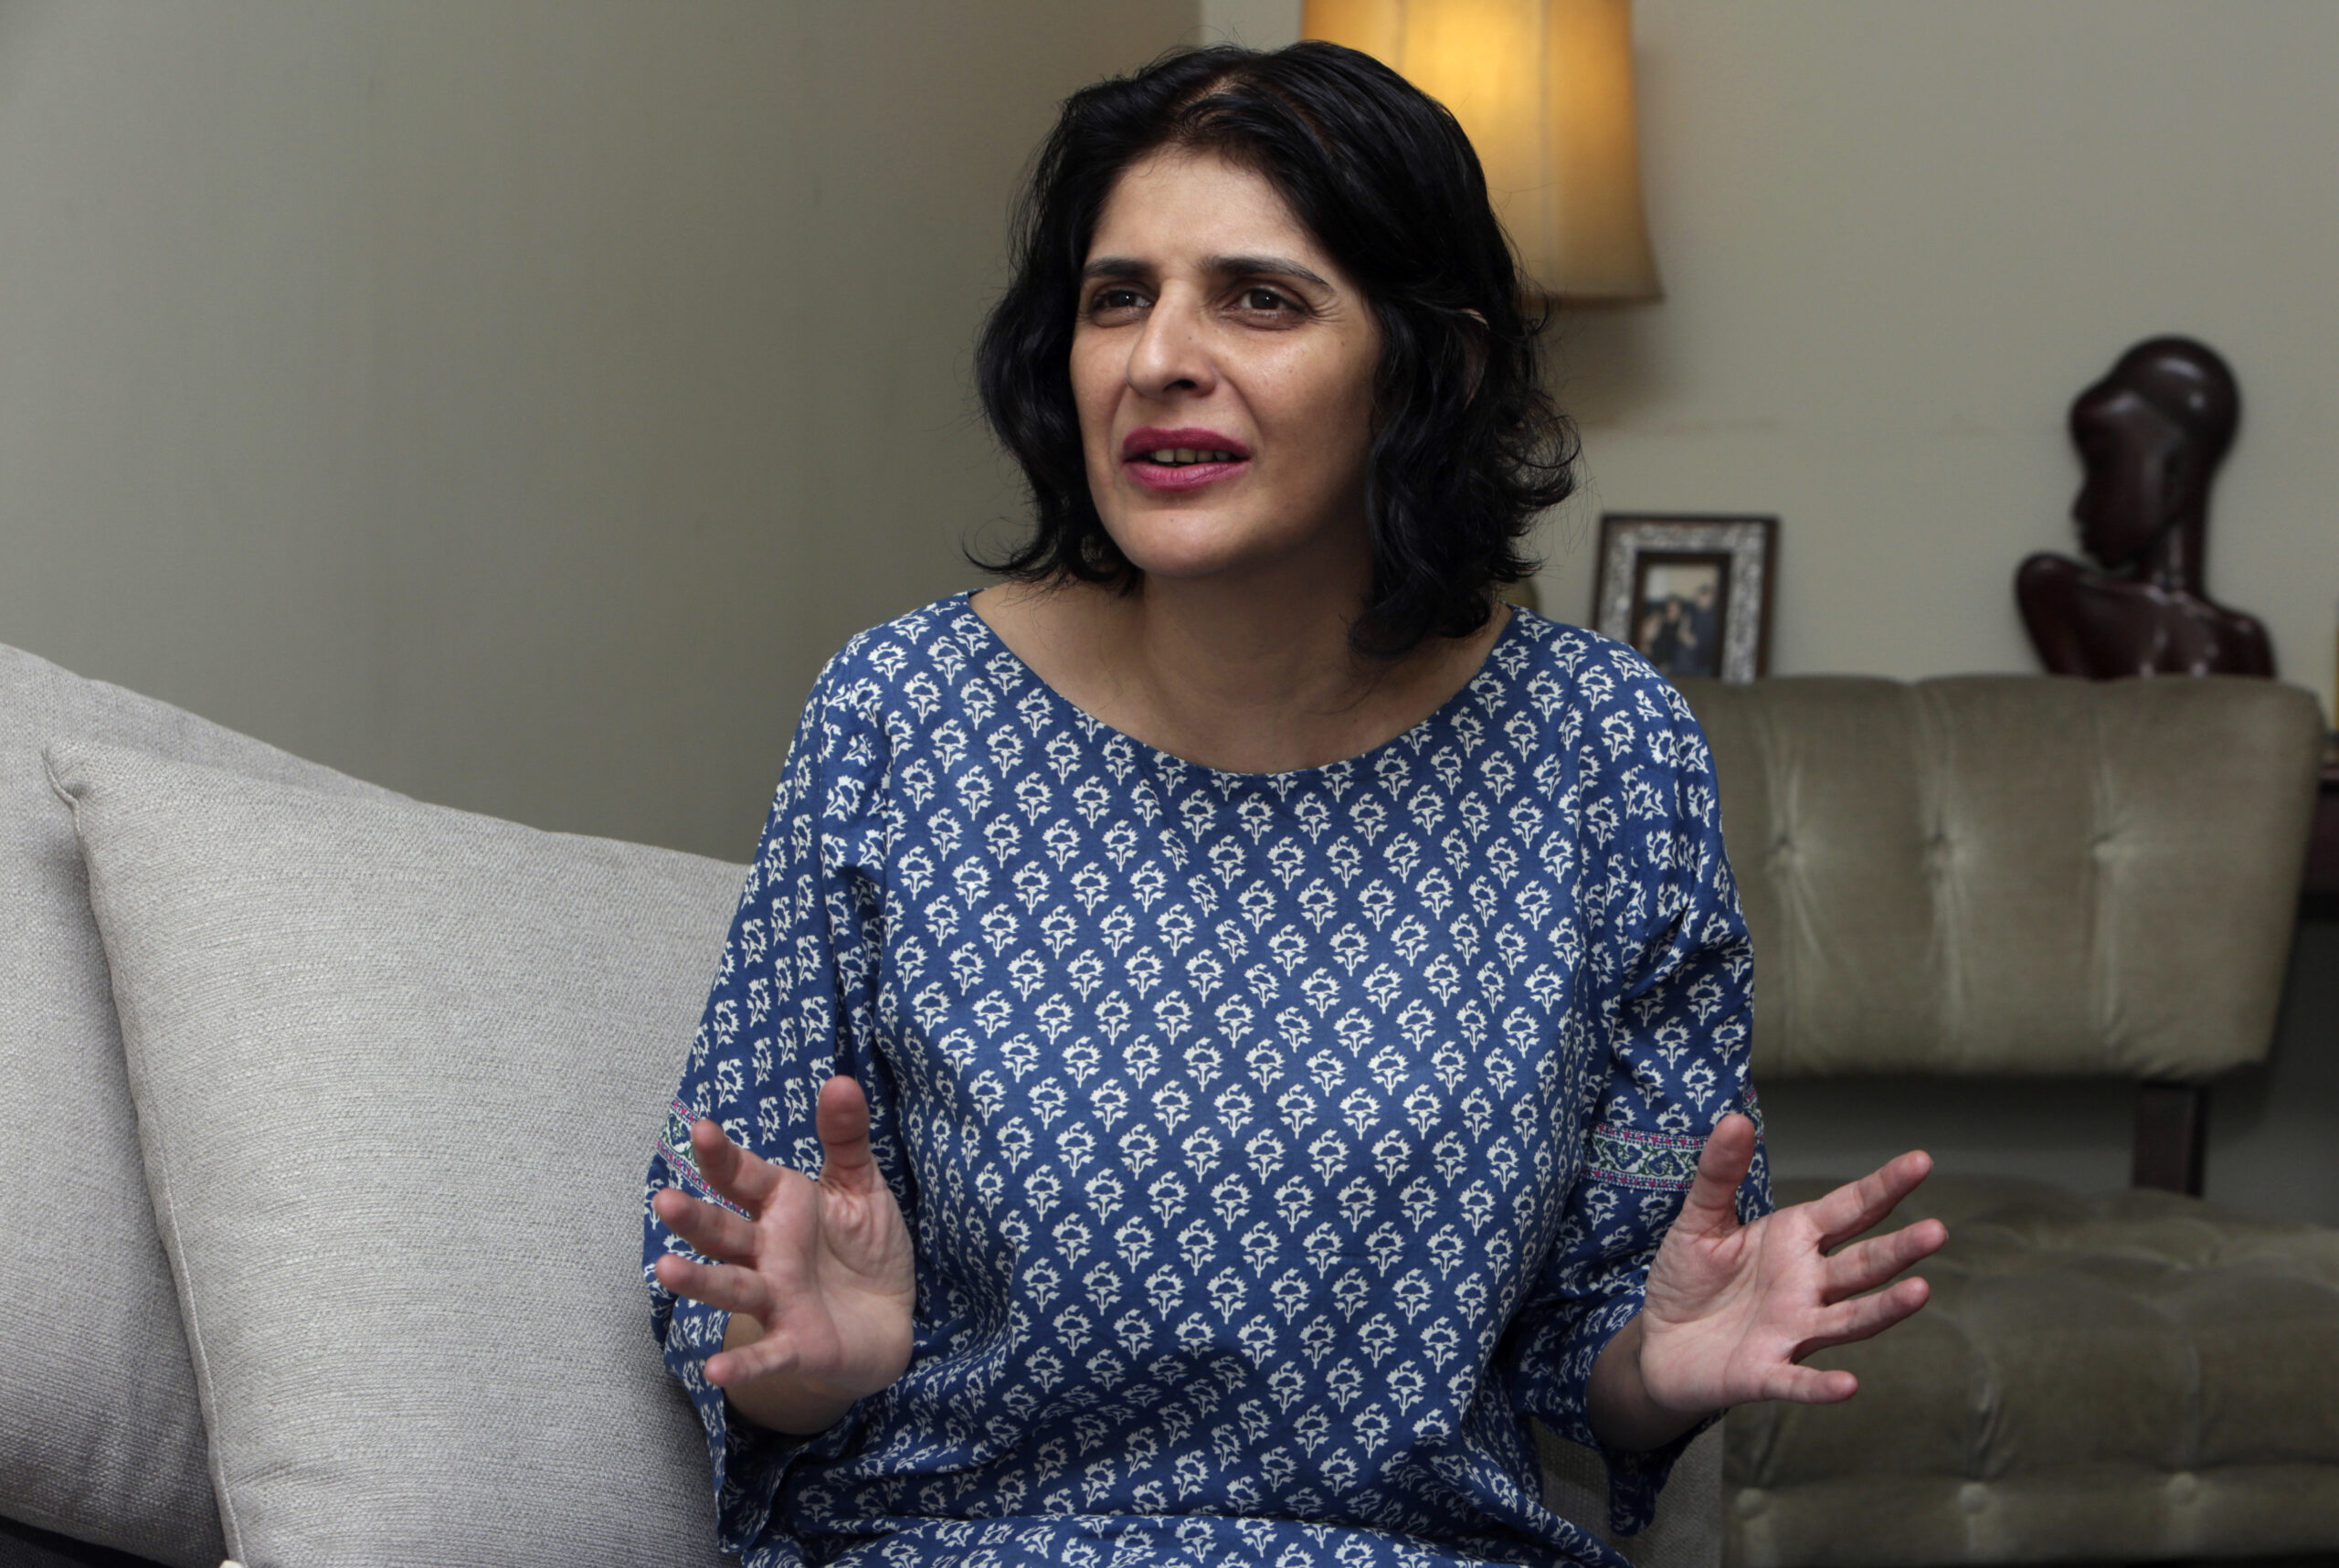 Social media activist, Gul Bukhari, wearing a blue and white printed shirt and pink lip stick, while speaking. She is sitting on a gray couch.